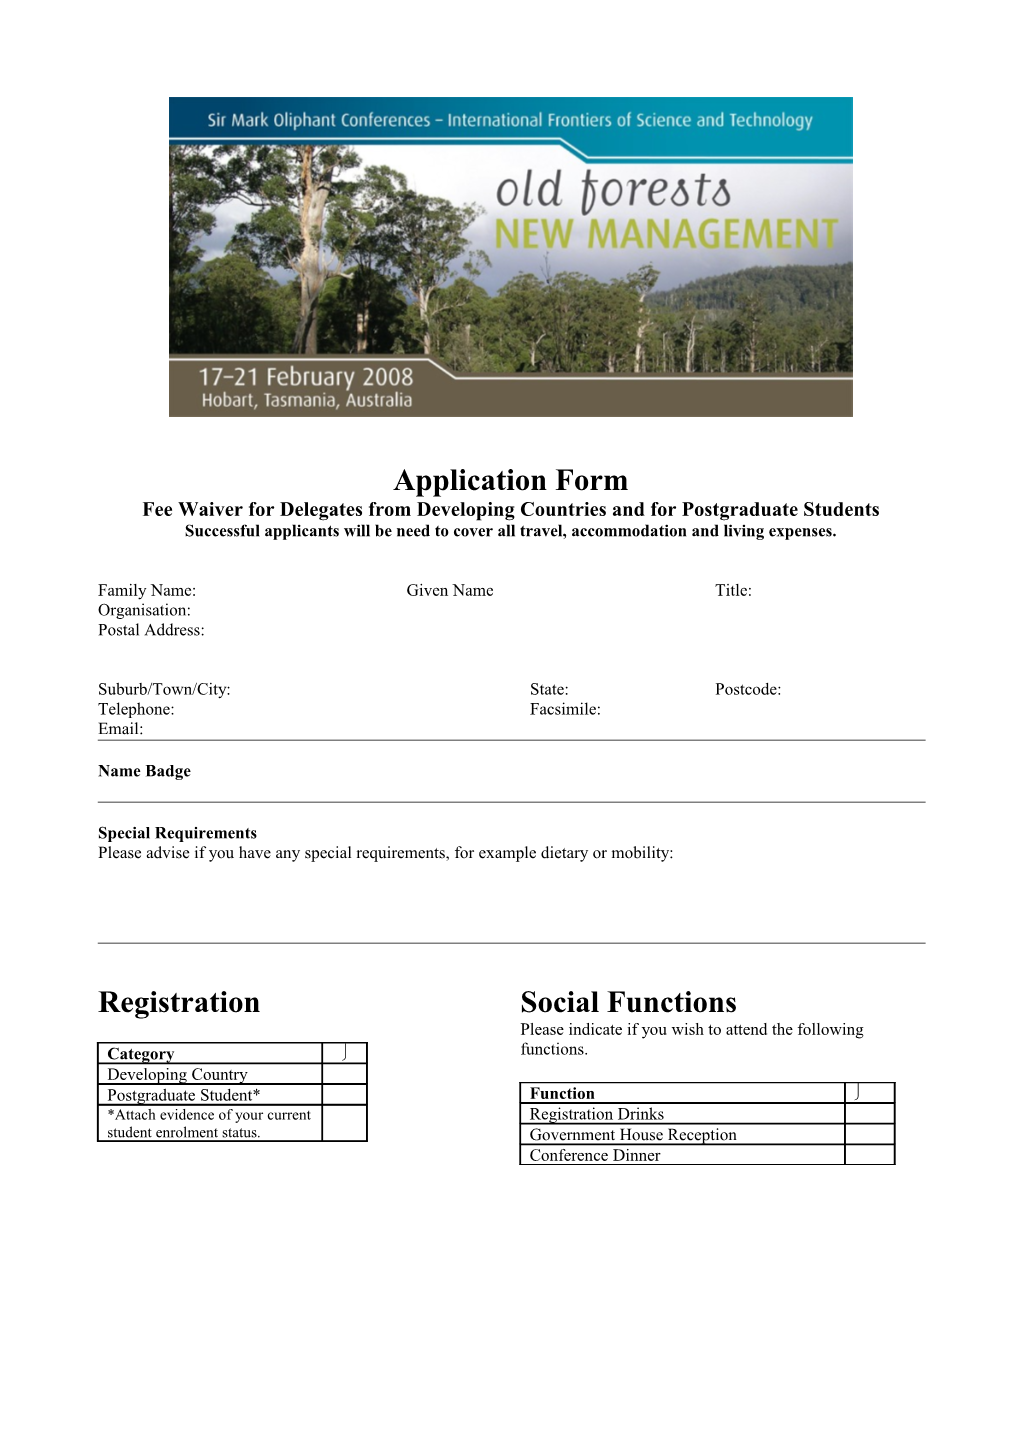 Application Form Fee Waiver for Delegates from Developing Countries and for Postgraduate